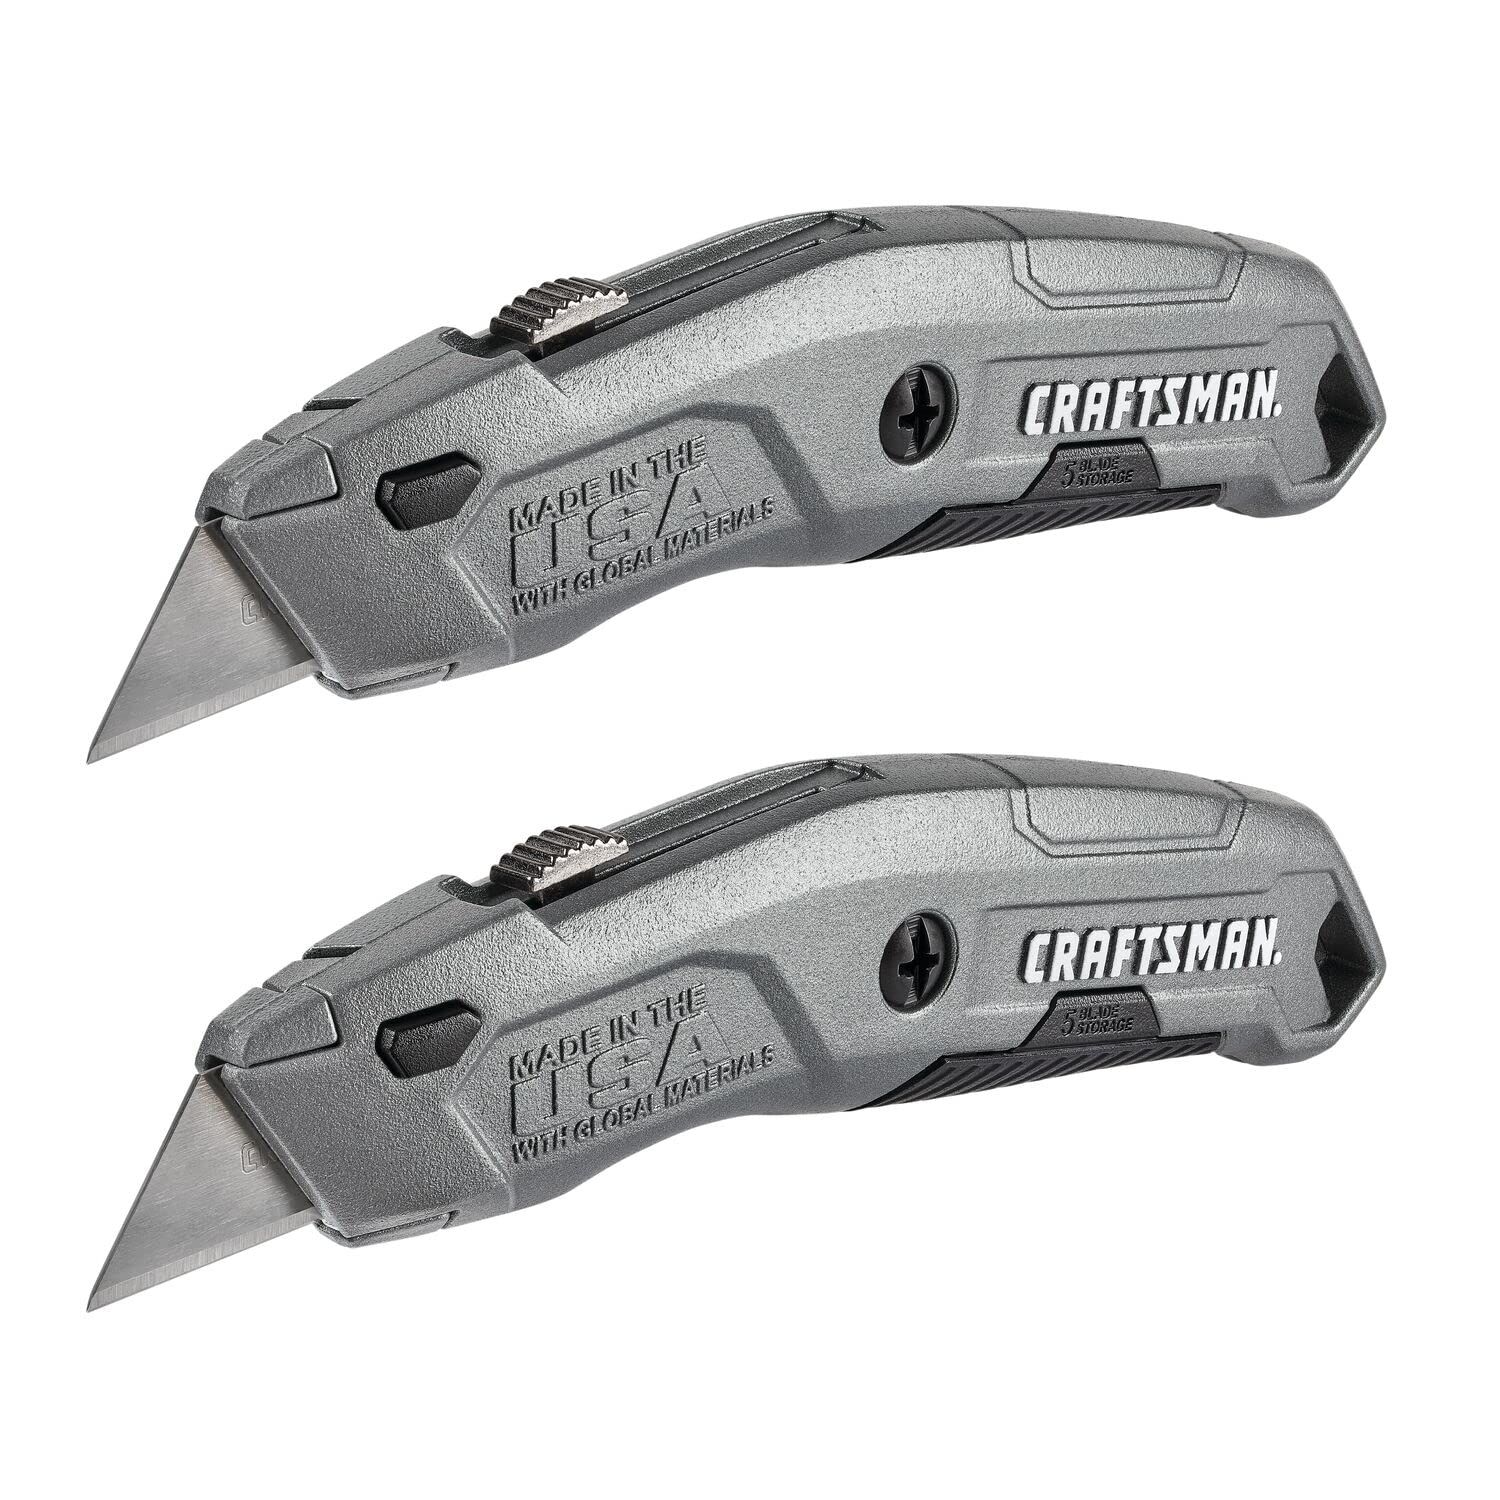 CRAFTSMAN Utility Knife, Quick Change, Retractable, 6 Blade, 2-Pack (CMHT10588)